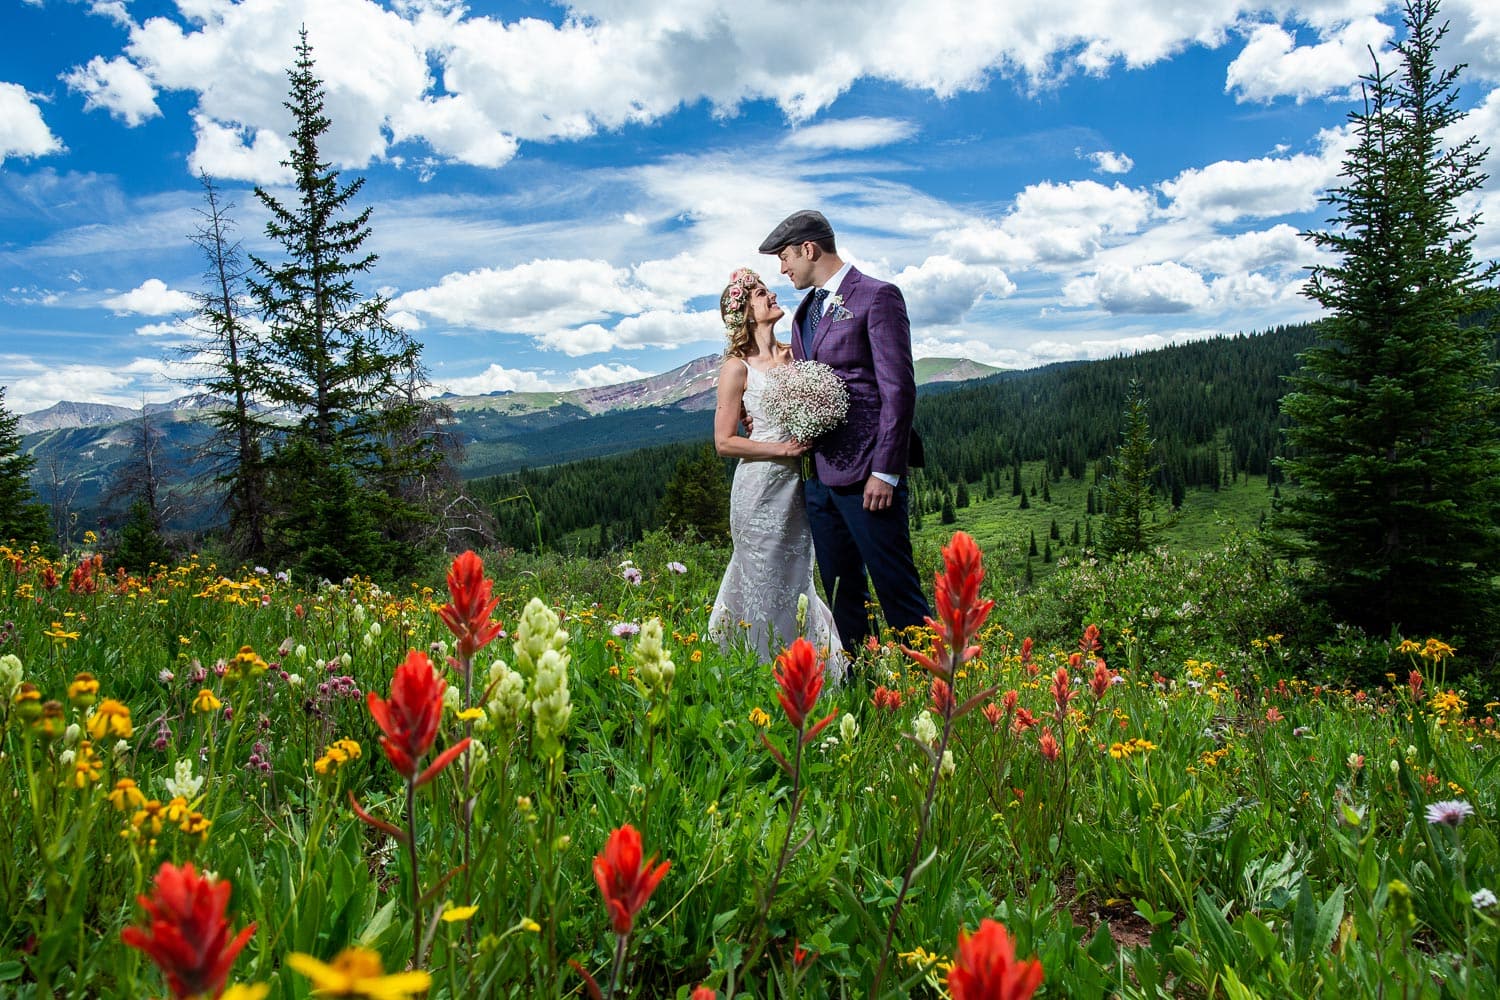 A boho bride and a groom in a purple jacket on the side of a mountain covered in wildflowers.